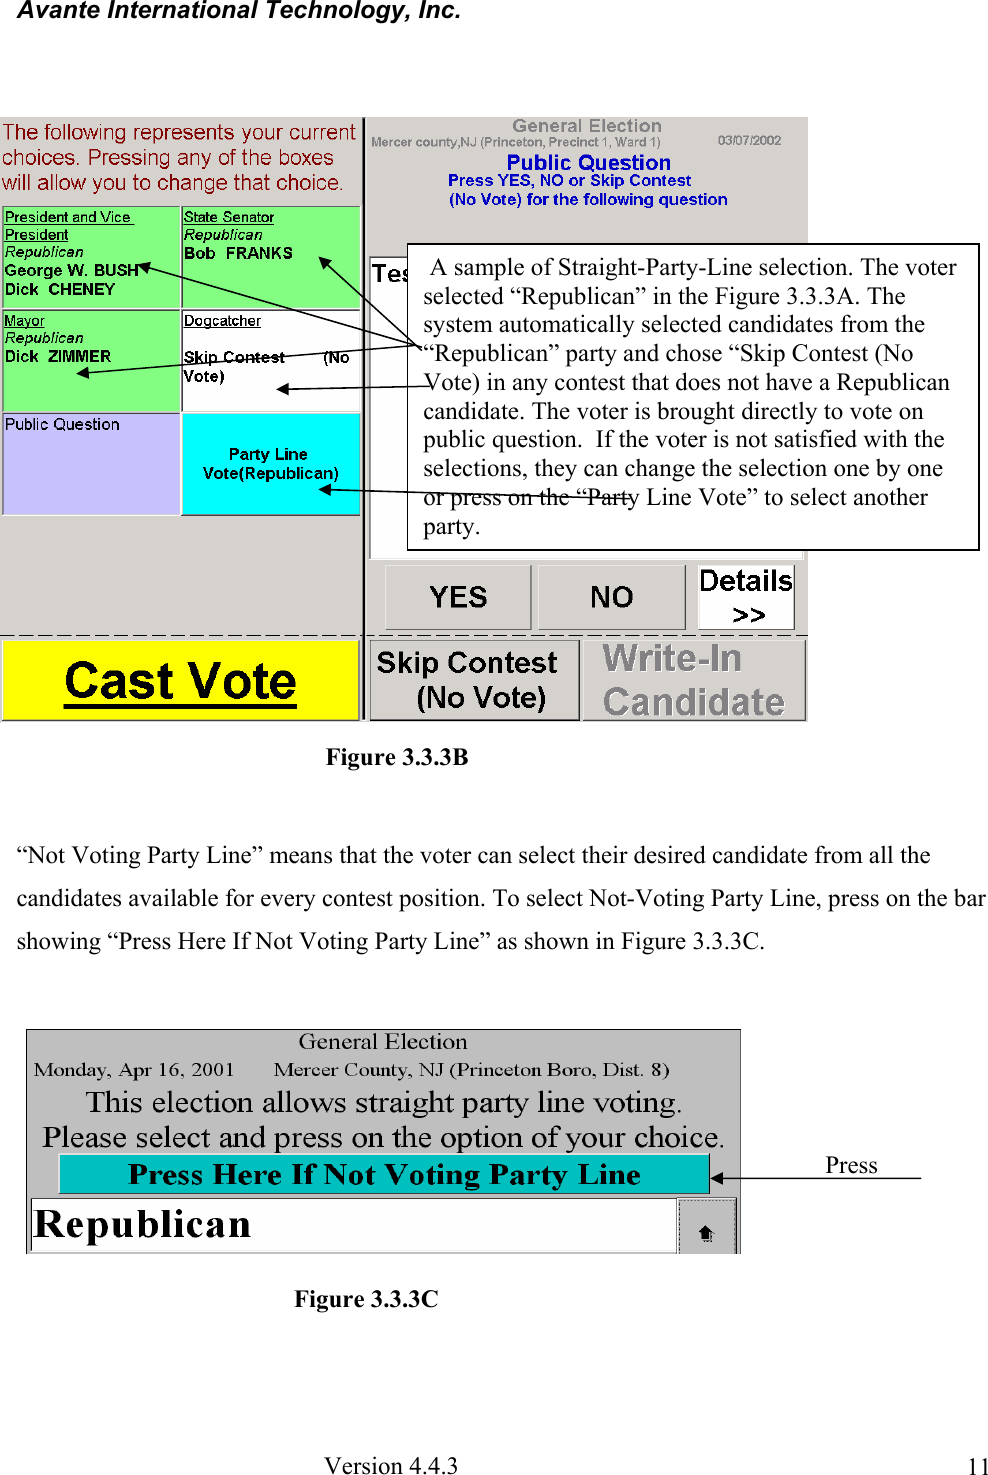 Avante International Technology, Inc.  Version 4.4.3  11  “Not Voting Party Line” means that the voter can select their desired candidate from all the candidates available for every contest position. To select Not-Voting Party Line, press on the bar showing “Press Here If Not Voting Party Line” as shown in Figure 3.3.3C.  Figure 3.3.3C  A sample of Straight-Party-Line selection. The voter selected “Republican” in the Figure 3.3.3A. The system automatically selected candidates from the “Republican” party and chose “Skip Contest (No Vote) in any contest that does not have a Republican candidate. The voter is brought directly to vote on public question.  If the voter is not satisfied with the selections, they can change the selection one by one or press on the “Party Line Vote” to select another party. Figure 3.3.3B Press 